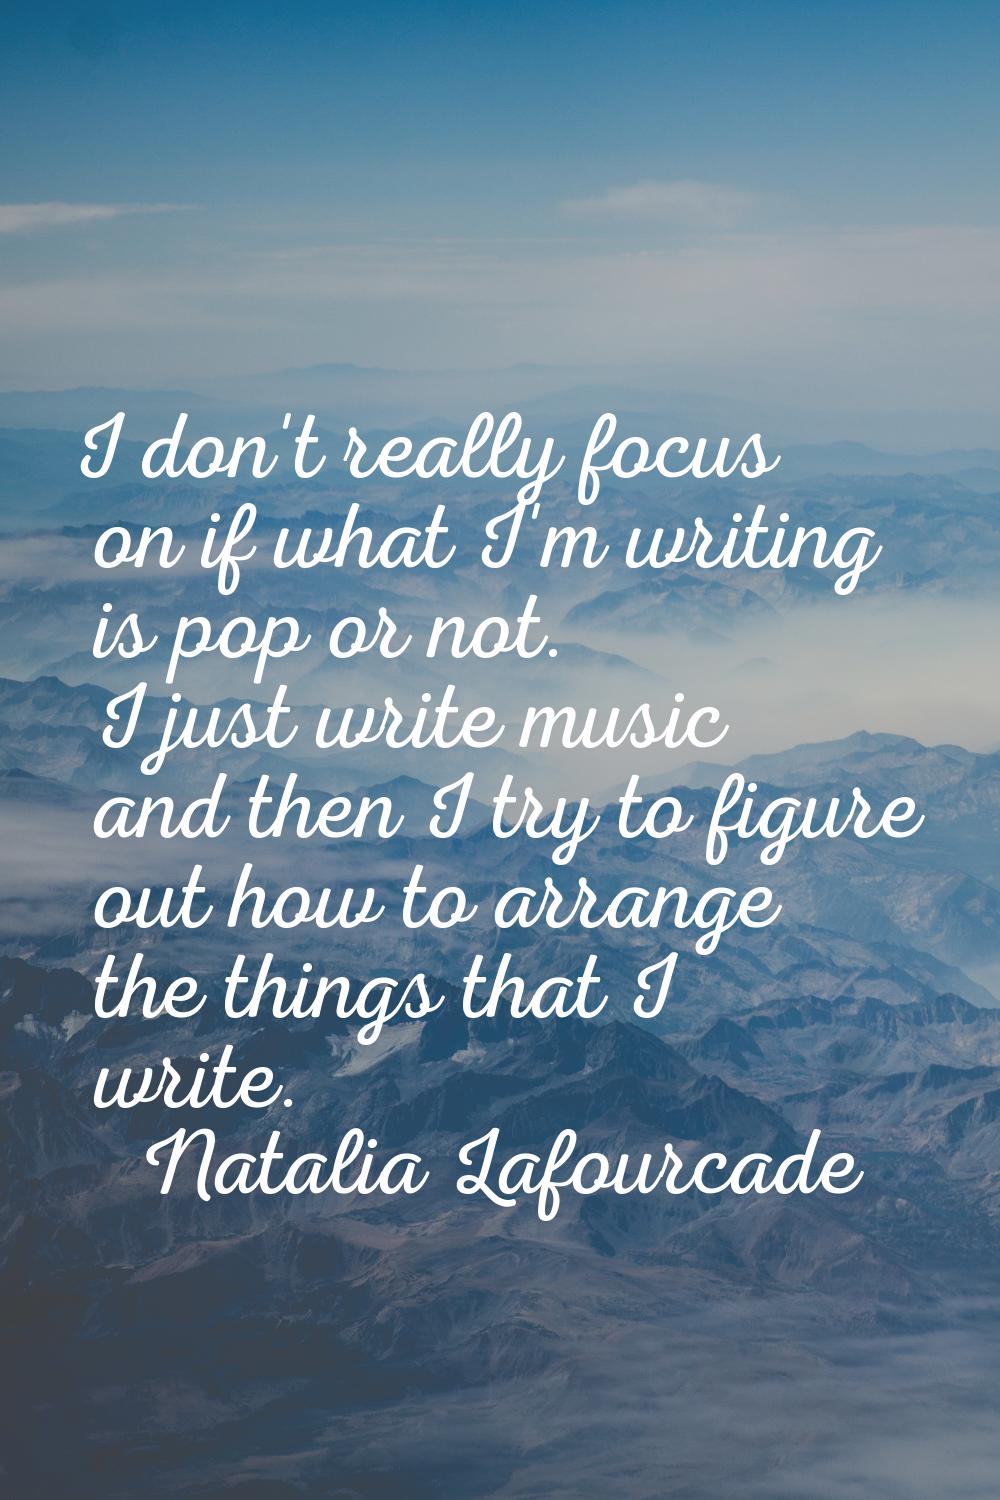 I don't really focus on if what I'm writing is pop or not. I just write music and then I try to fig